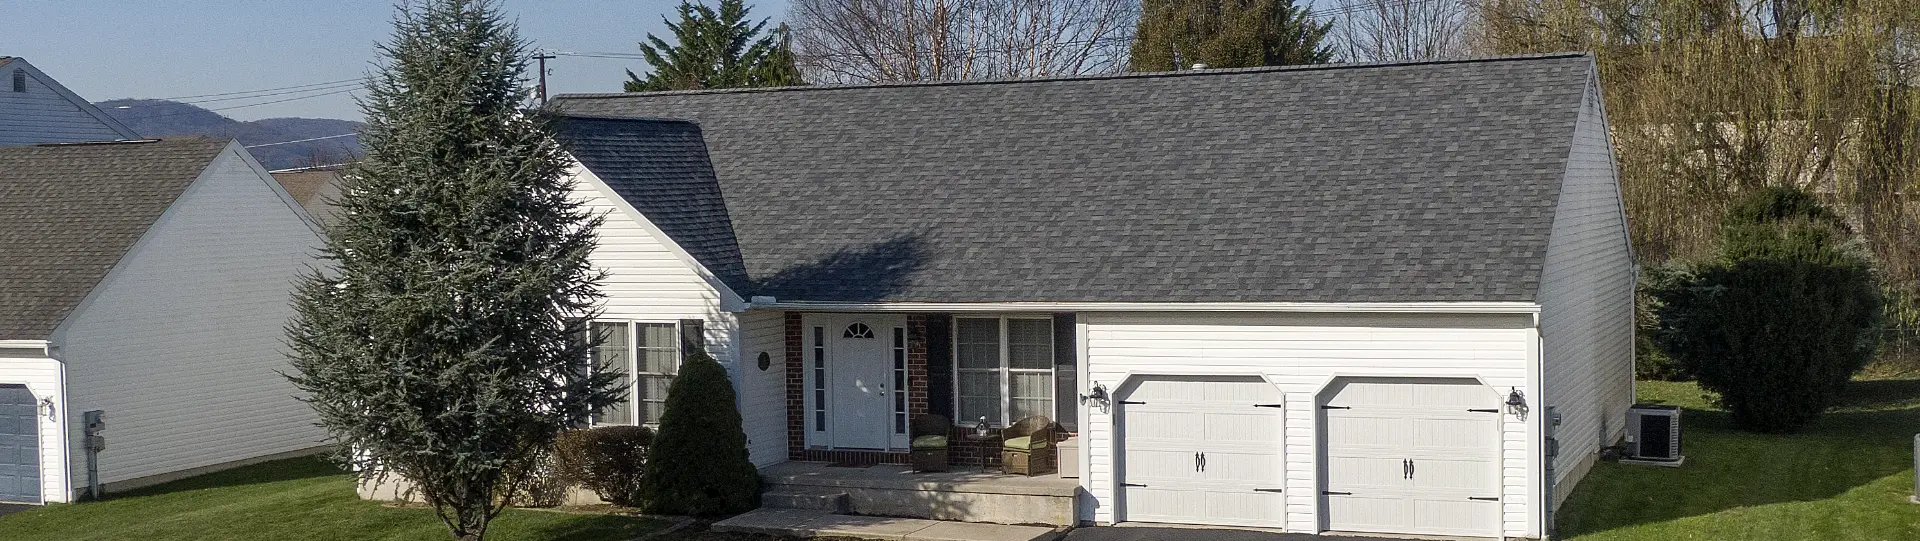 Close up, curbside view of a small home in Southeastern PA with new shingles courtesy of Middle Creek Roofing